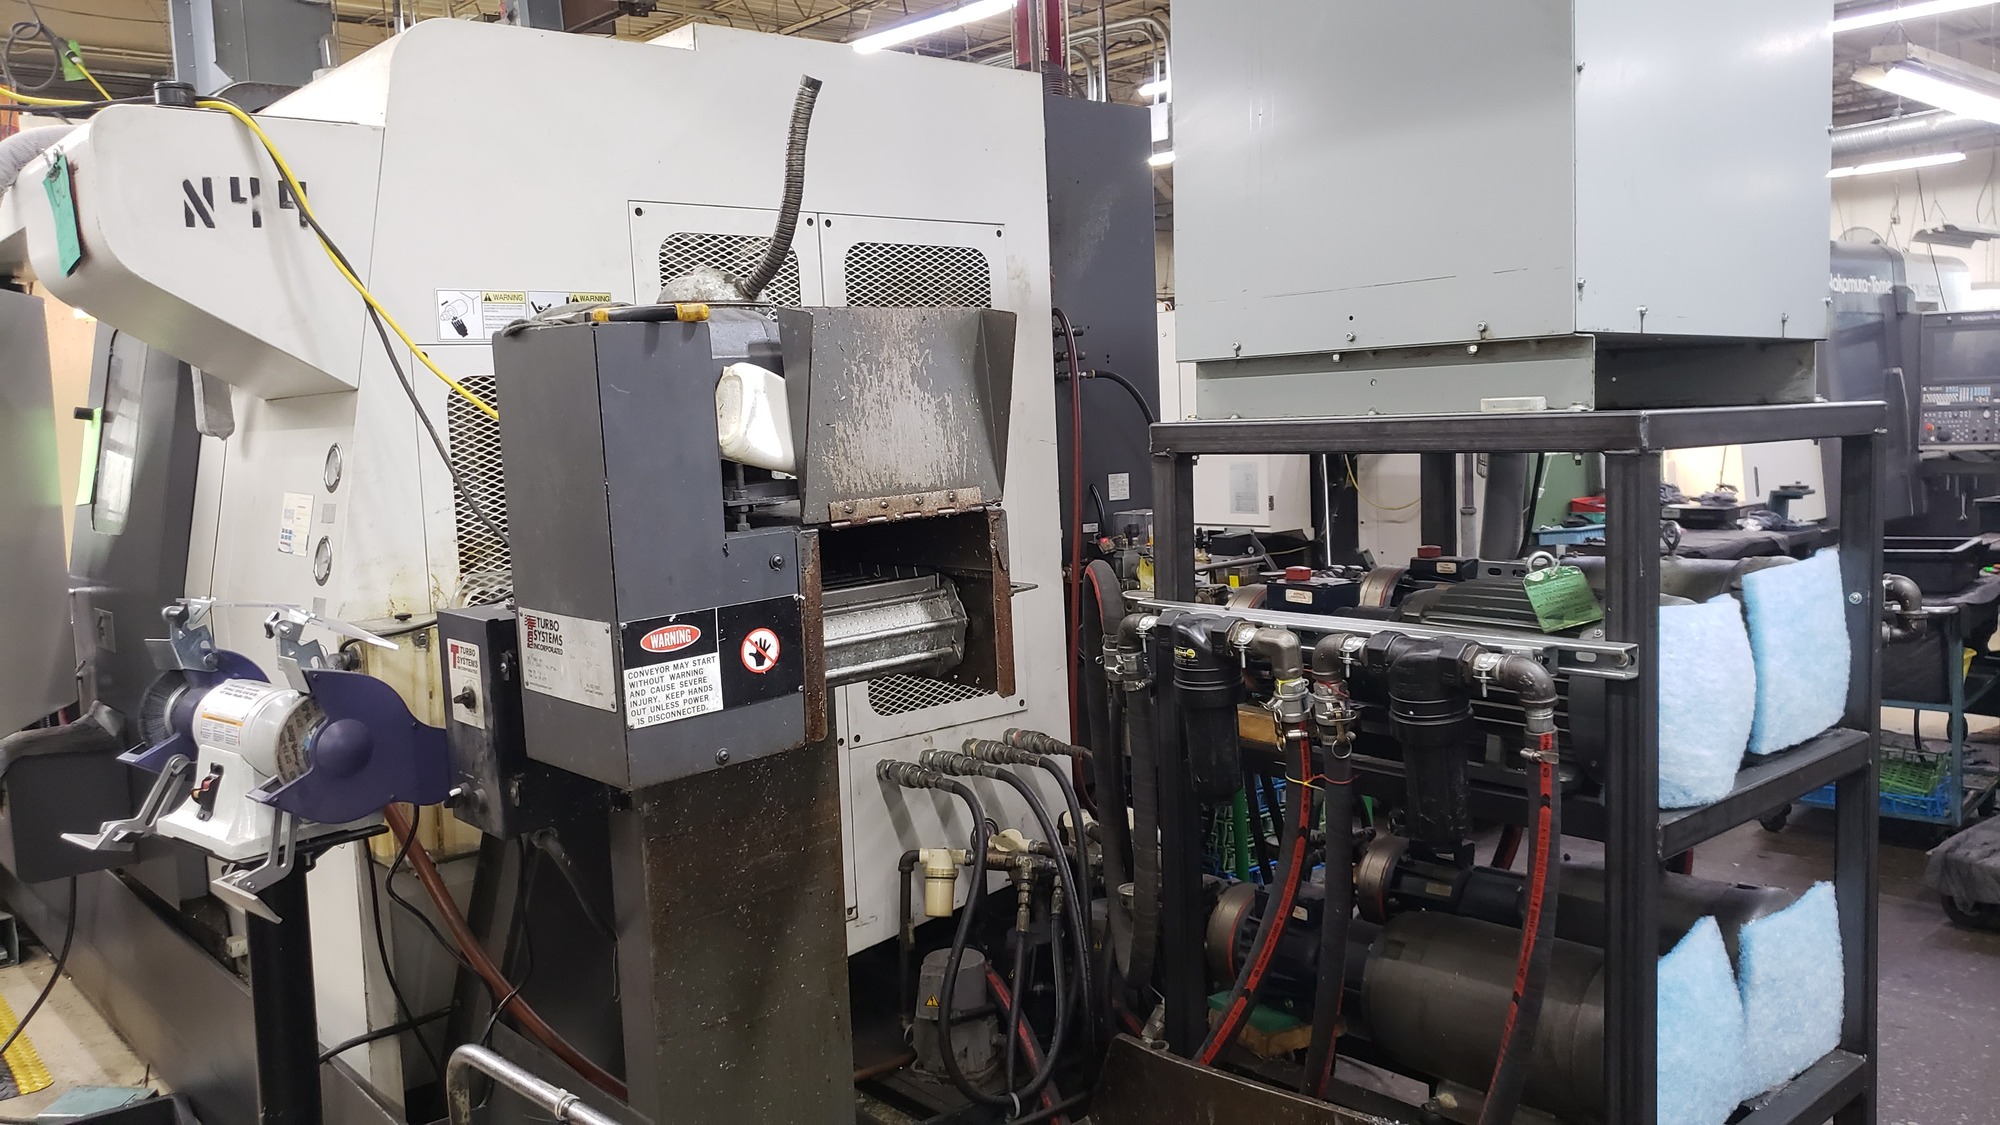 2003 NAKAMURA-TOME WTW-150 5-Axis or More CNC Lathes | 520 Machinery Sales LLC